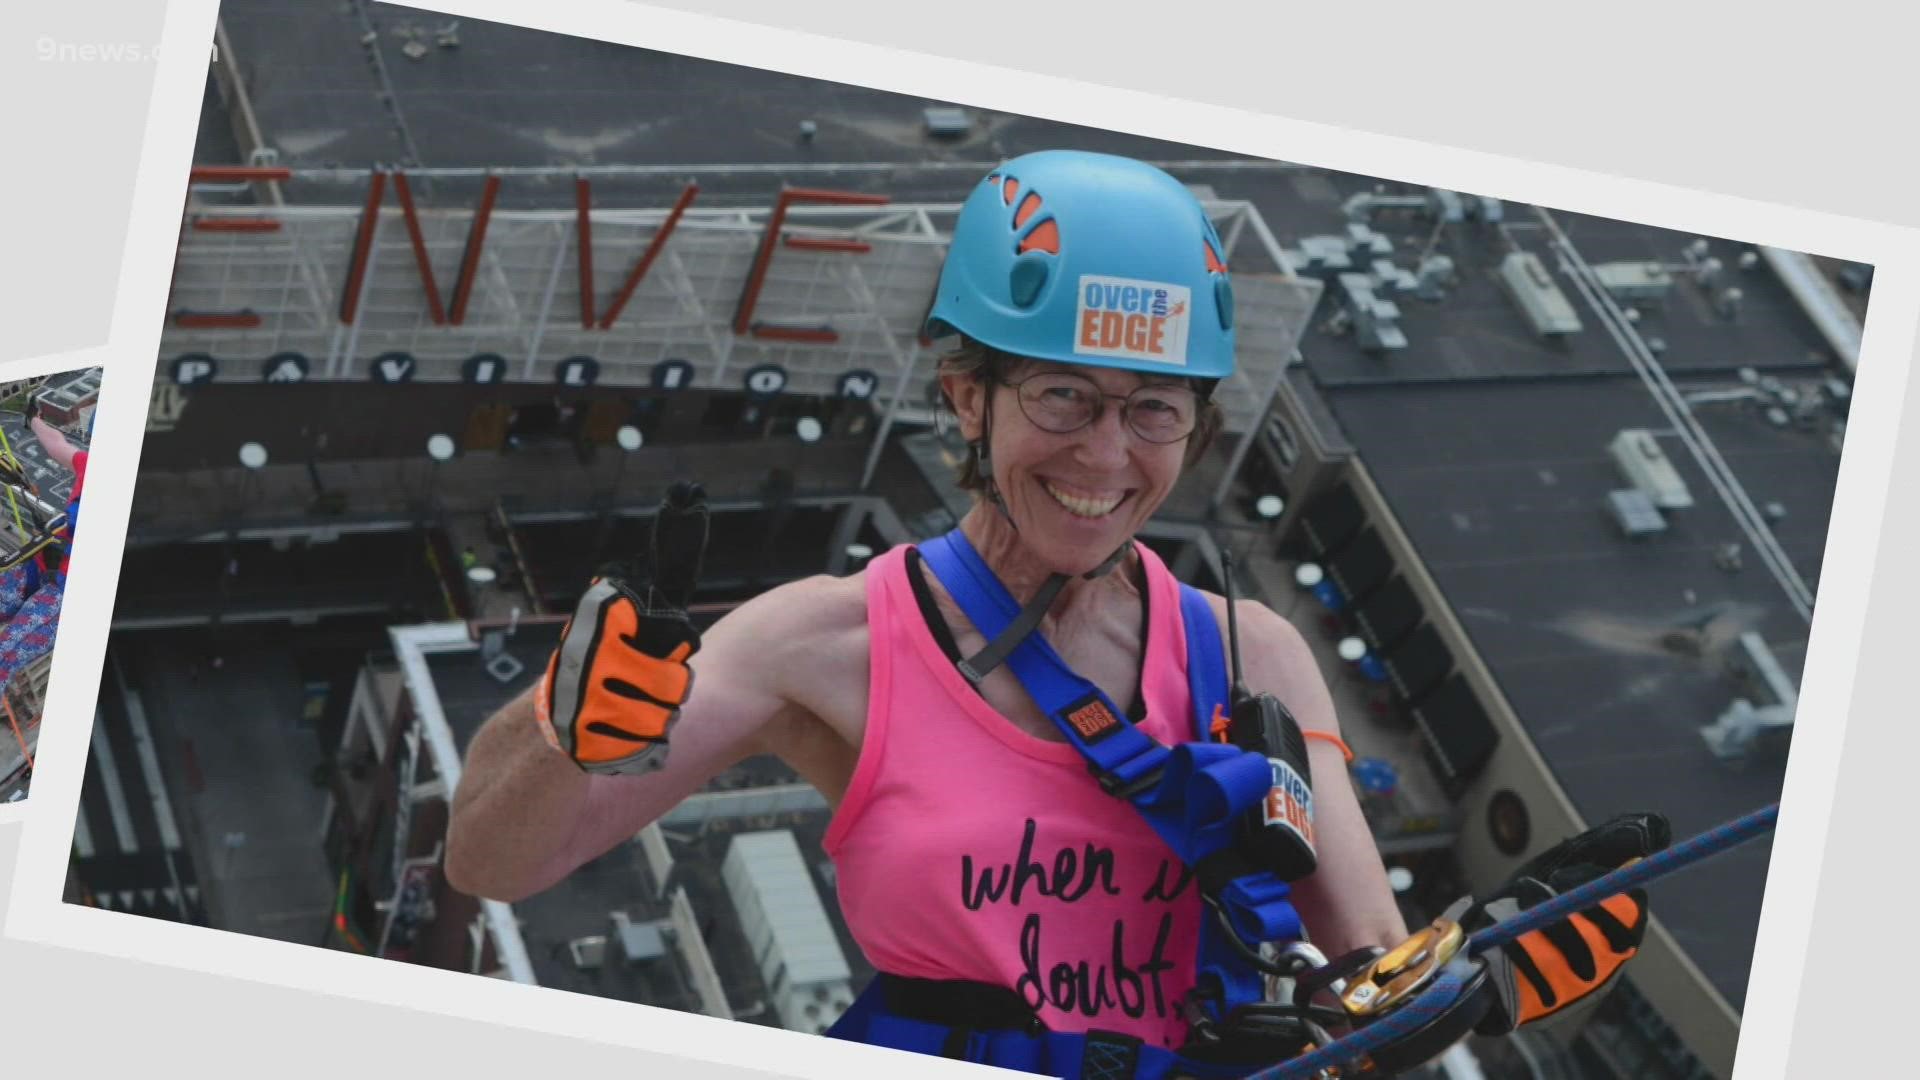 Over the Edge is an event hosted by the Cancer League of Colorado to raise money for cancer research.